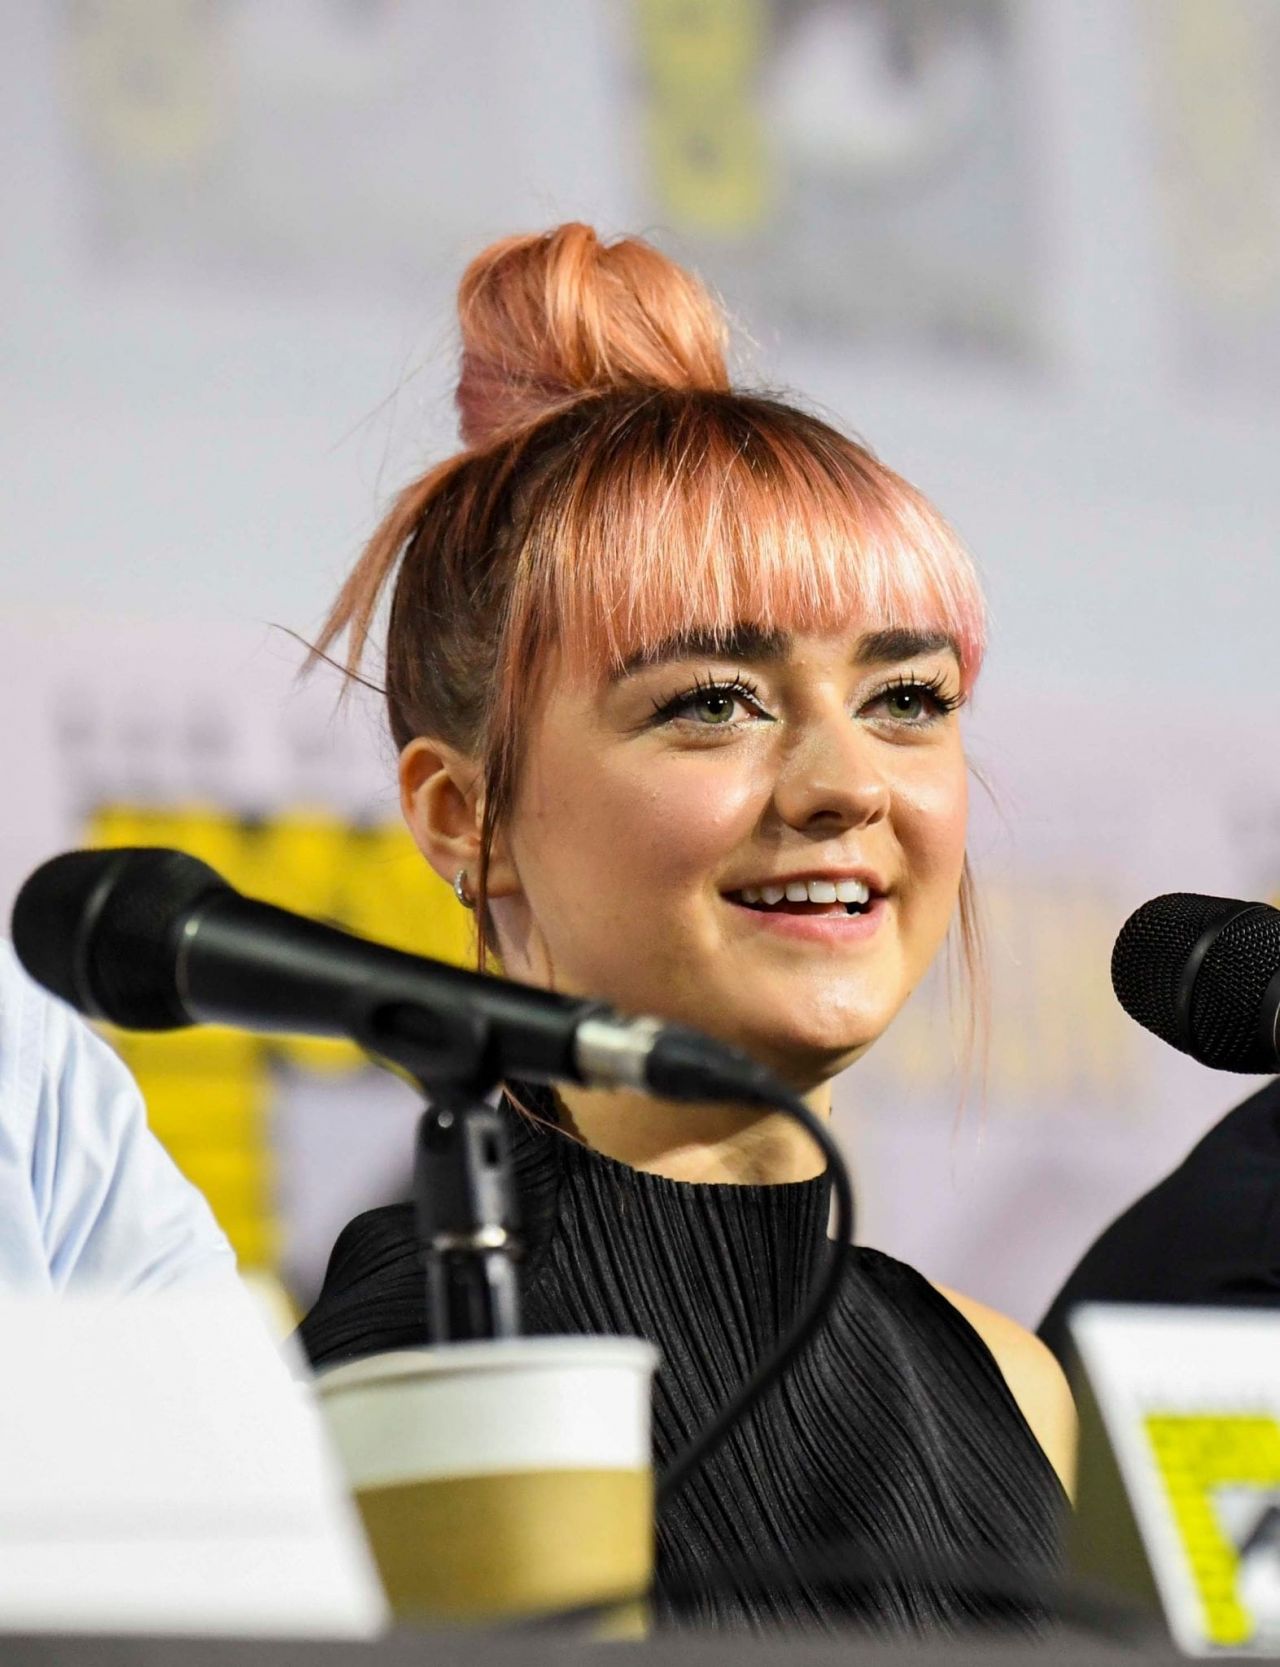 maisie-williams-game-of-thrones-panel-q-a-at-sdcc-2019-1.jpg